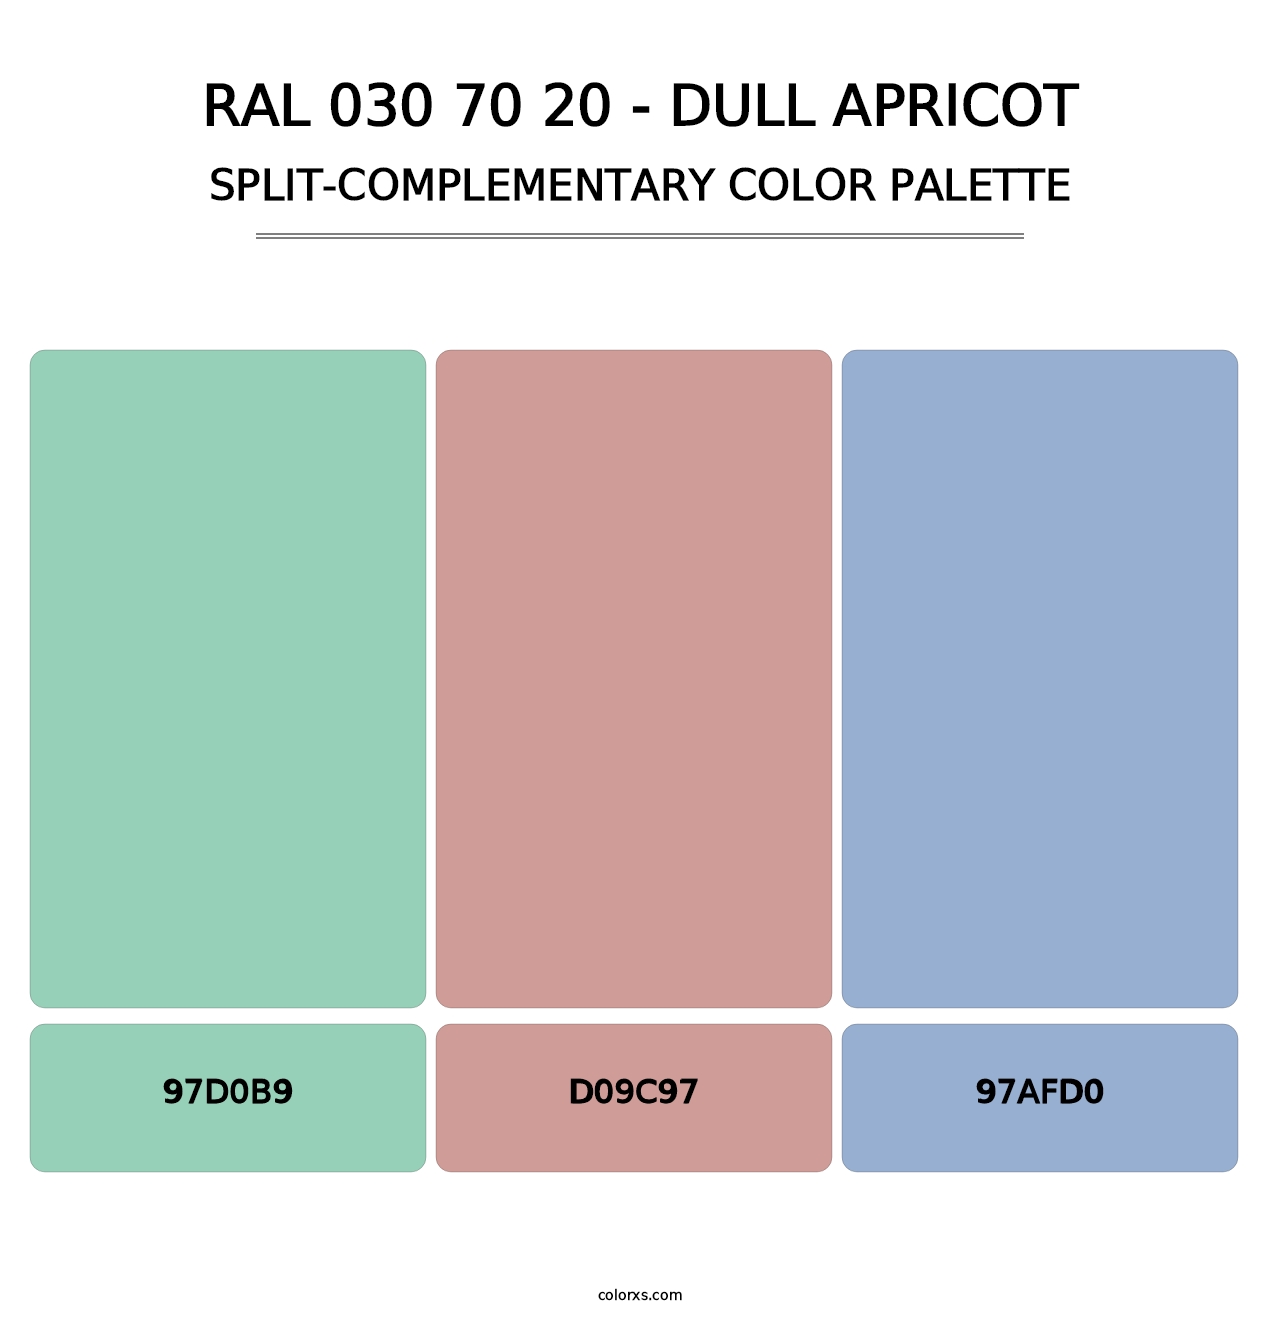 RAL 030 70 20 - Dull Apricot - Split-Complementary Color Palette